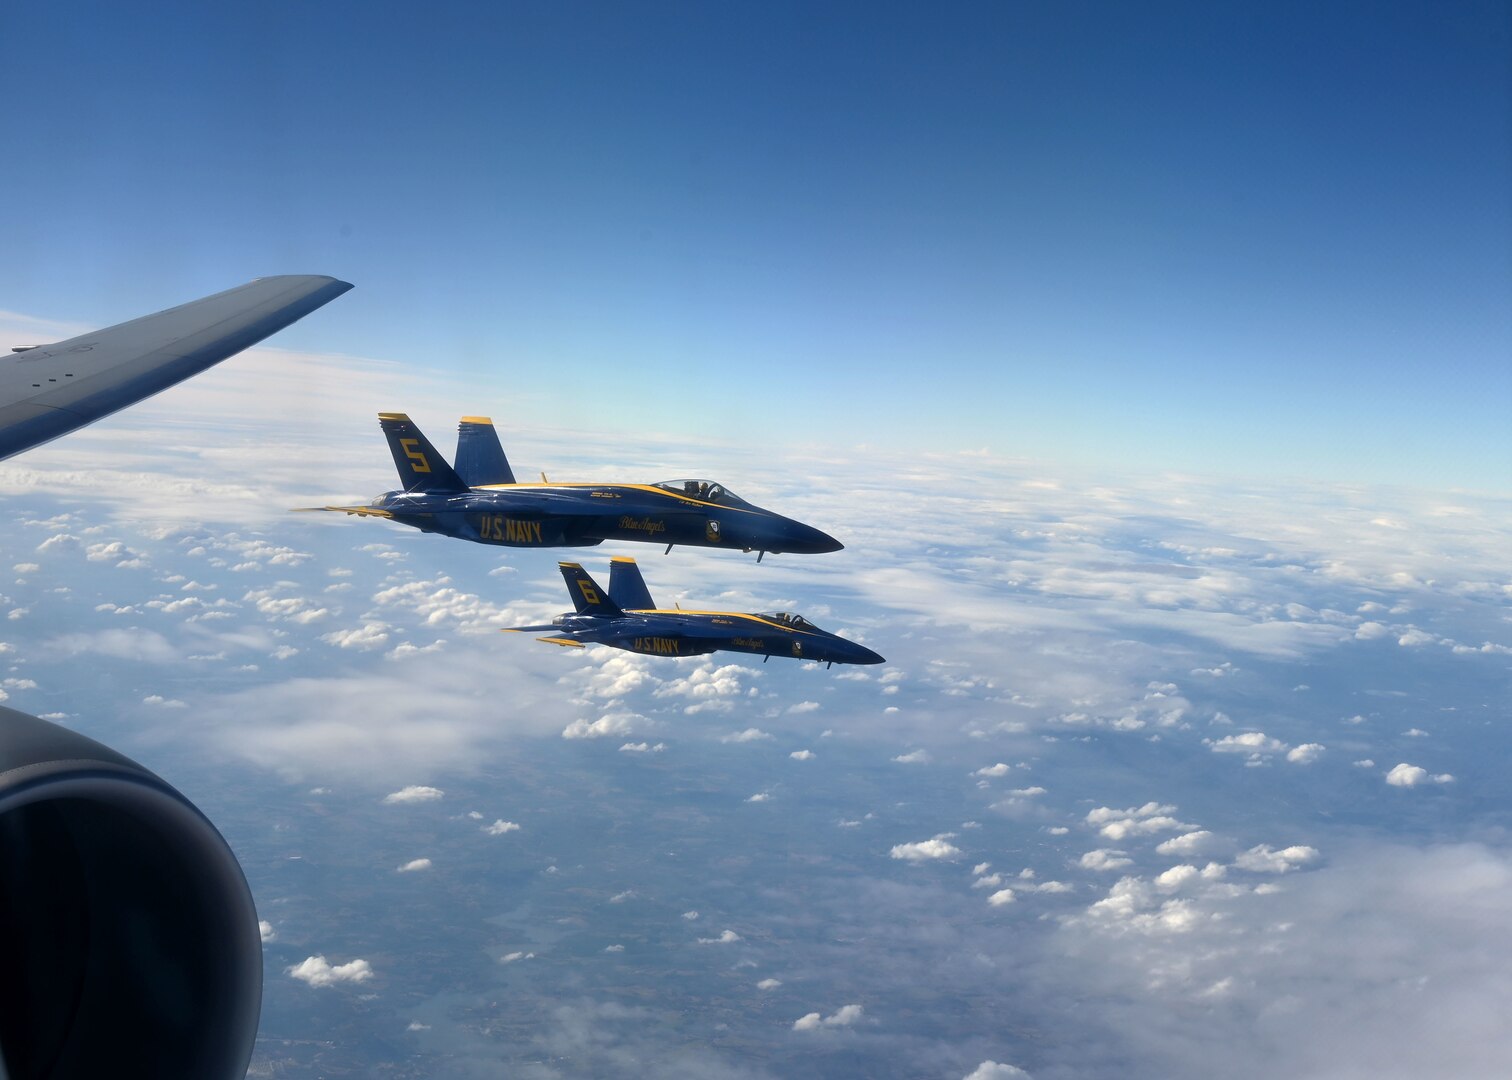 Two F/A-18 Super Hornets of the U.S. Navy's Blue Angels flight squadron fly alongside a Pease KC-46A Pegasus refueler Dec. 12, 2020, in Georgia airspace. The jets were refueled for a flyover at the Army-Navy Game in West Point, N.Y. The Pease aircrew teamed with another KC-46A from McConnell AFB, Kan.